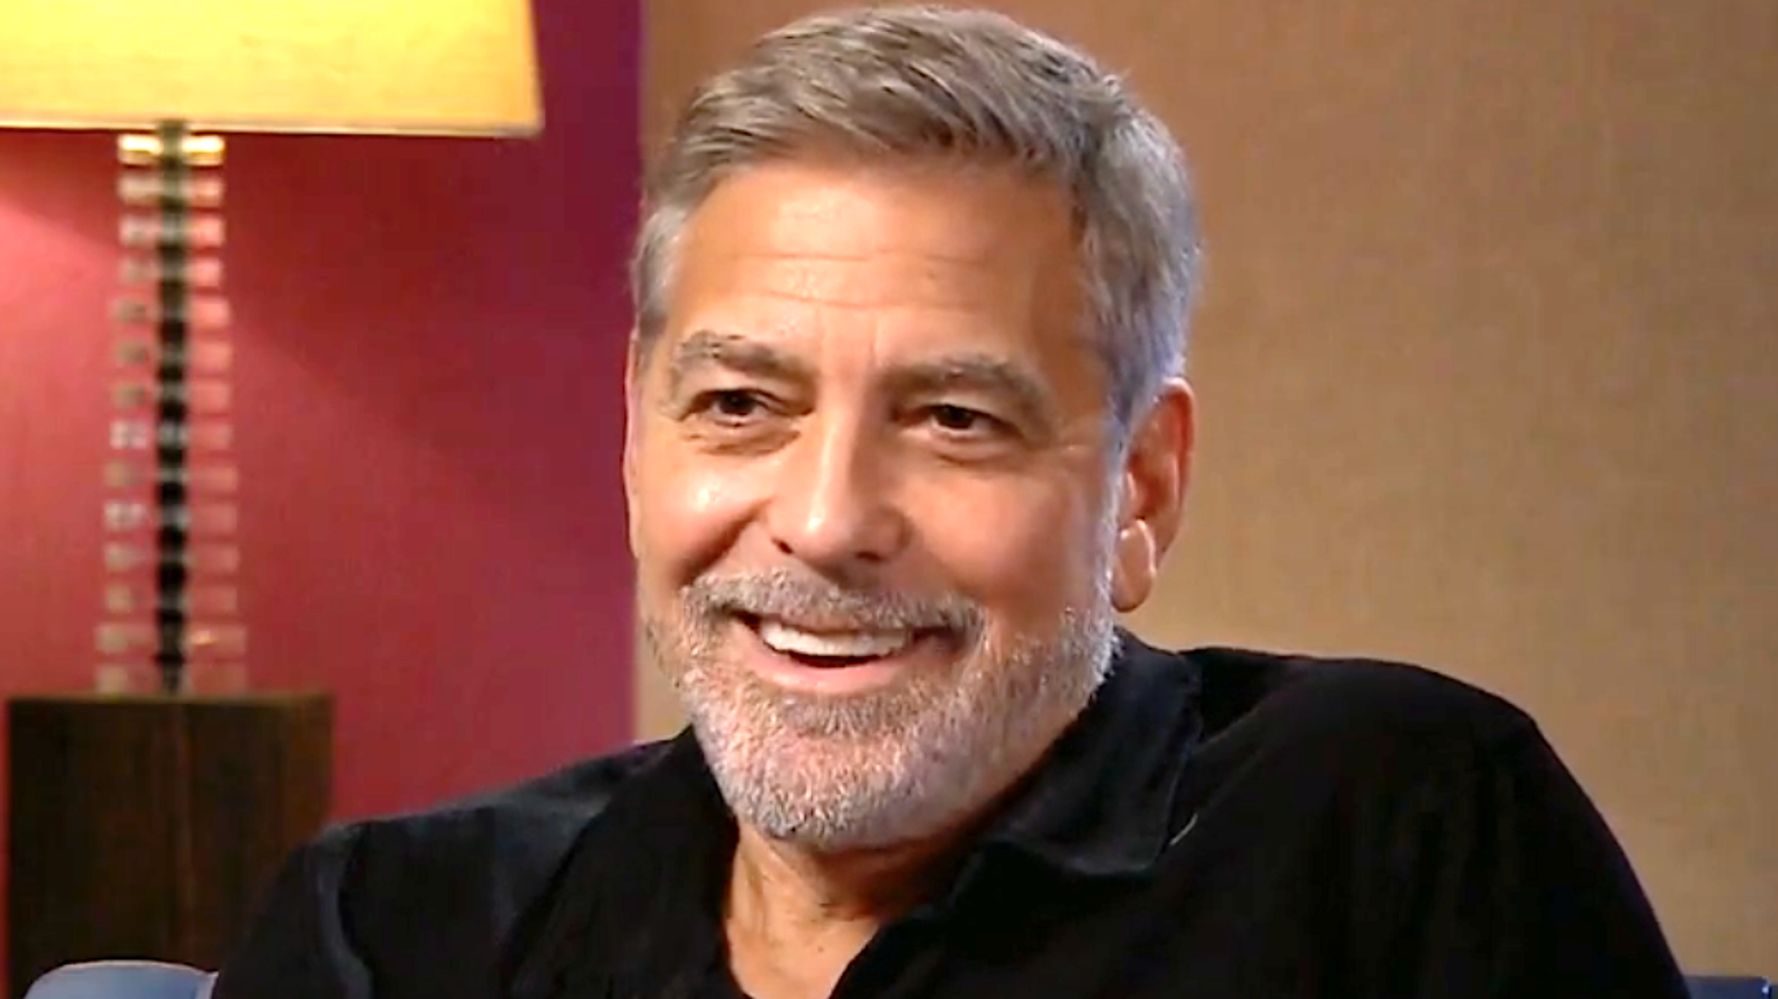 George Clooney Brilliantly Breaks Down Why He Won’t Run For Office